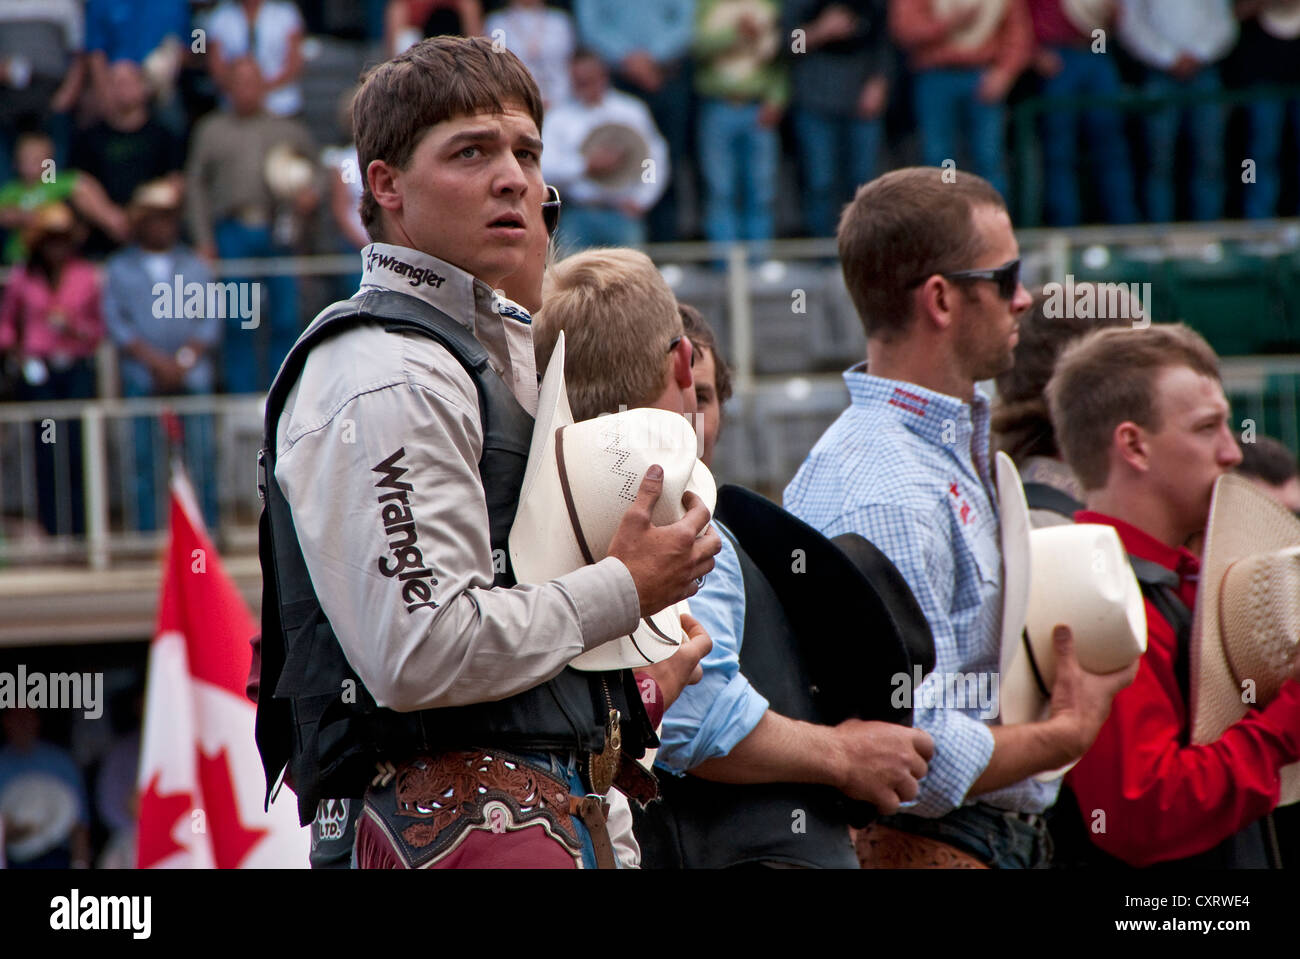 Calgary Stampede 2012 rodeo contestants during playing of O Canada prior to program event. Stock Photo